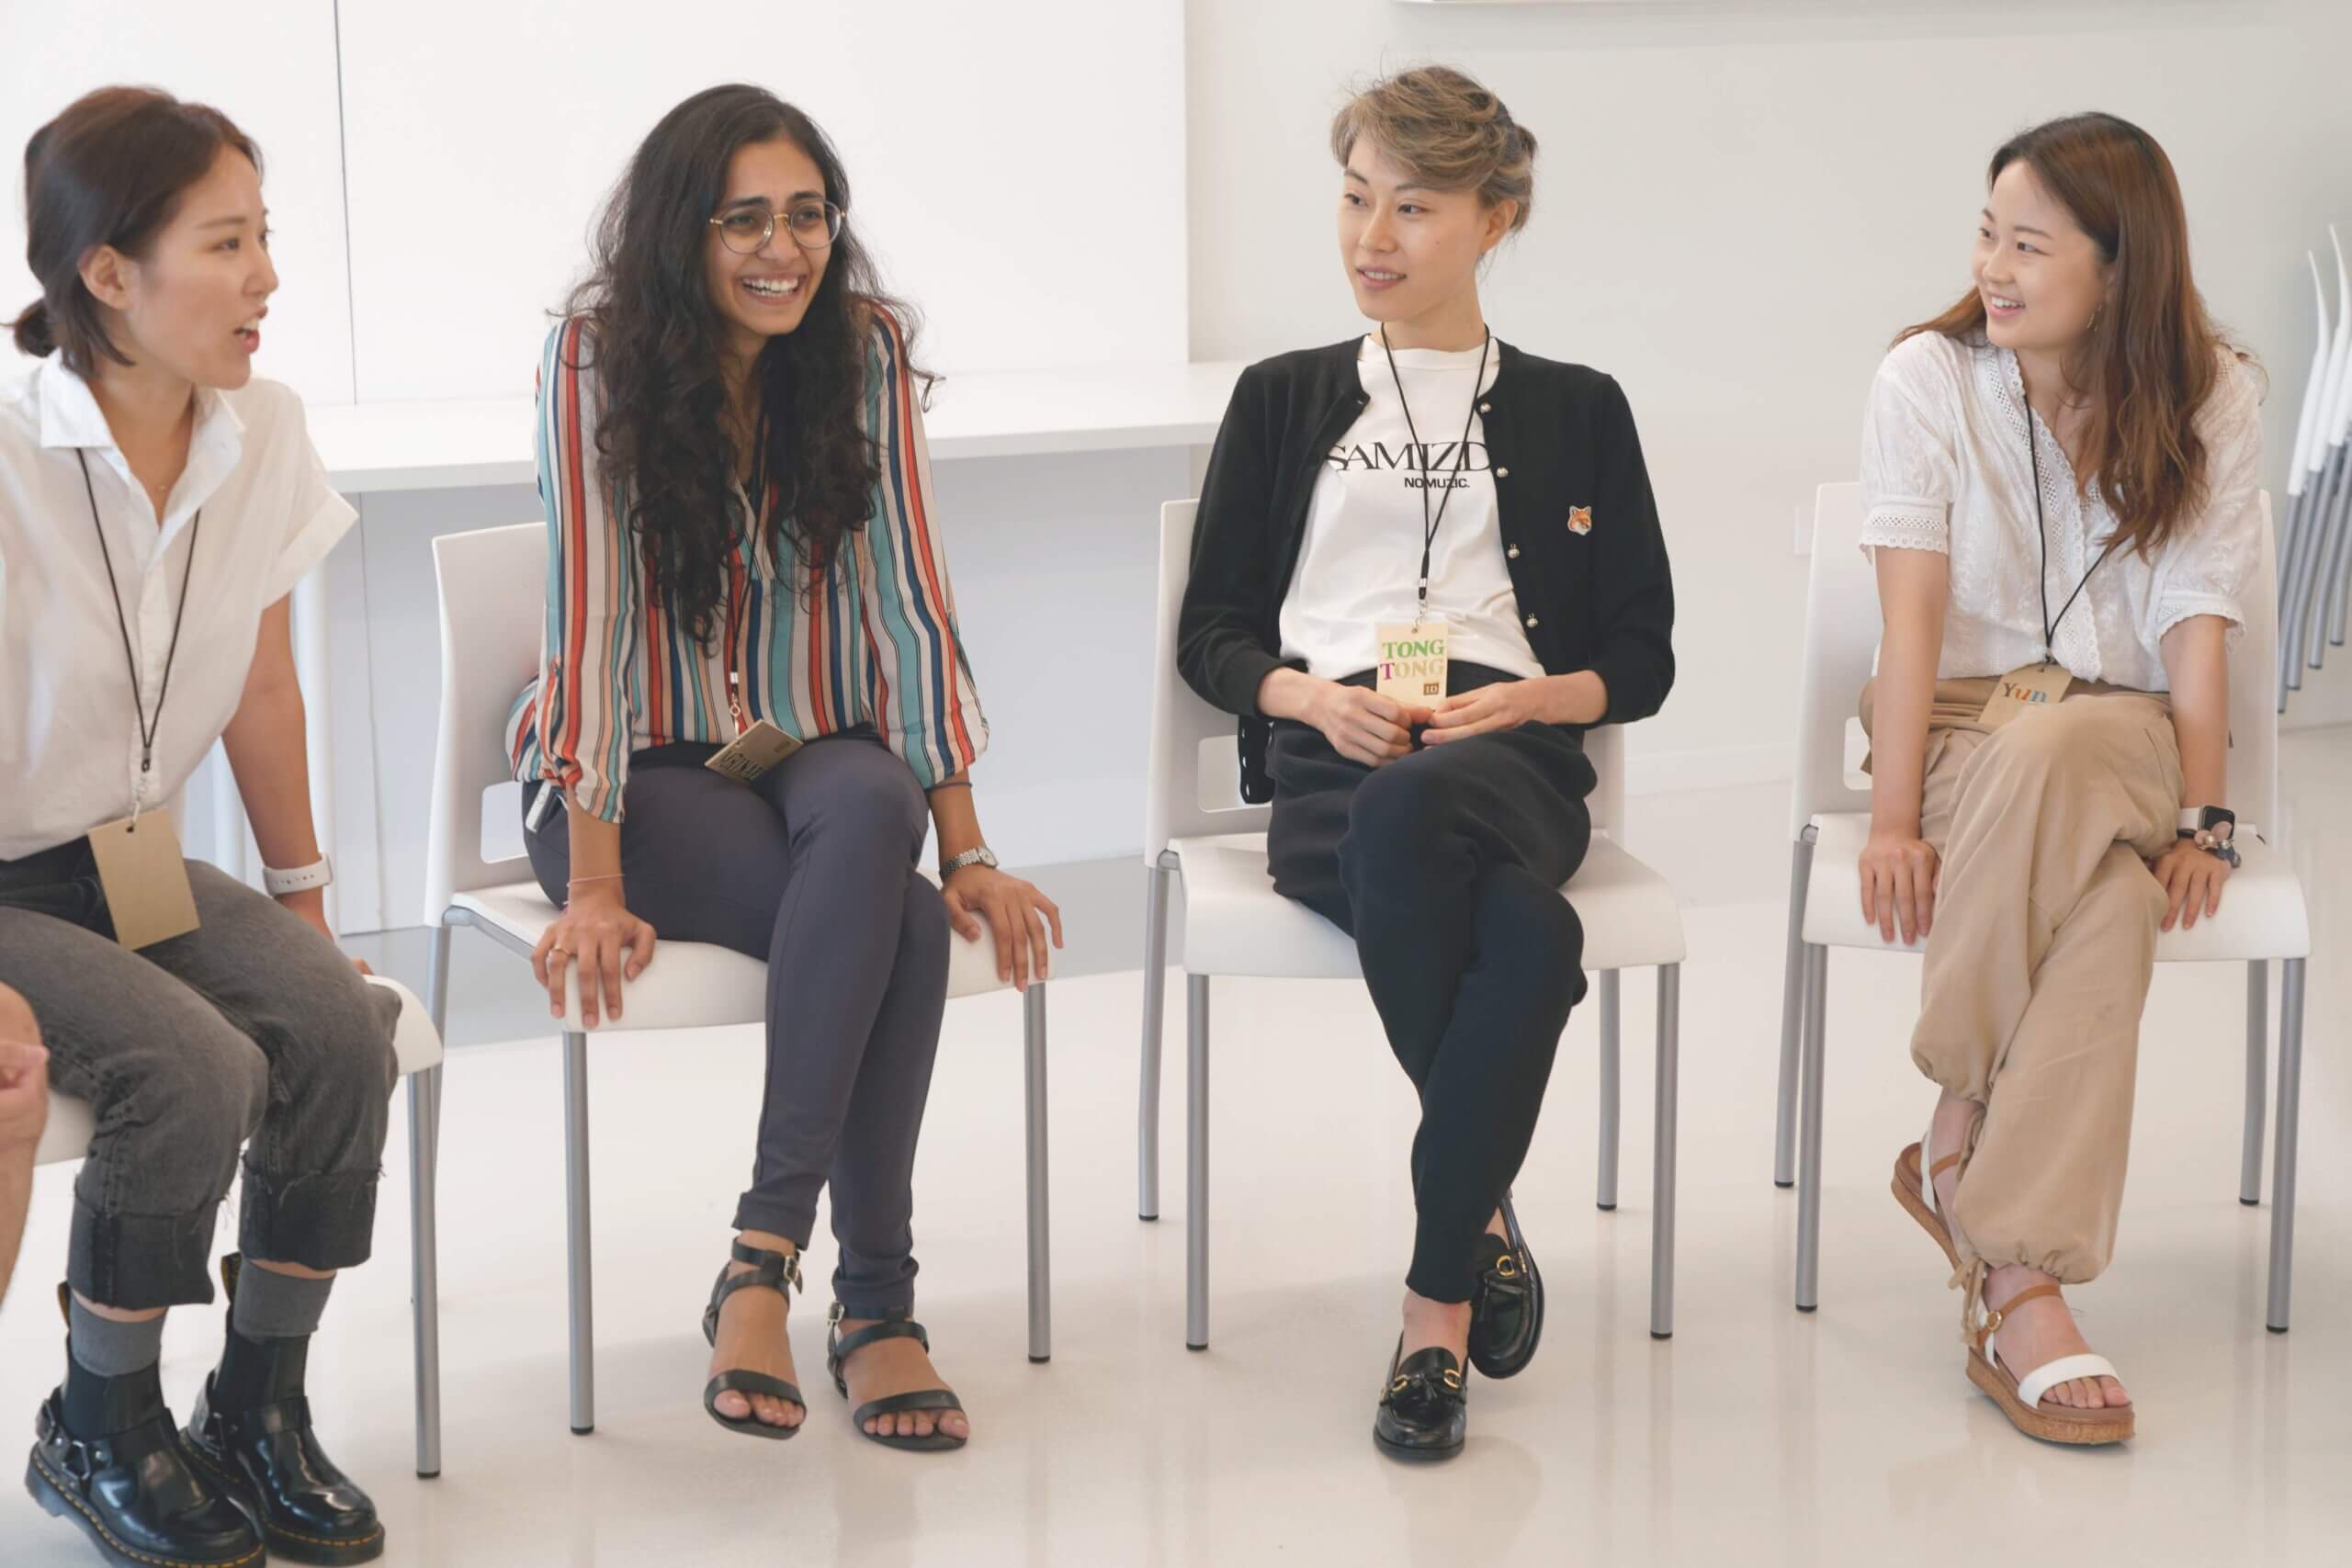 A photo of a group of women speaking on a panel at the Institute of Design in Chicago.